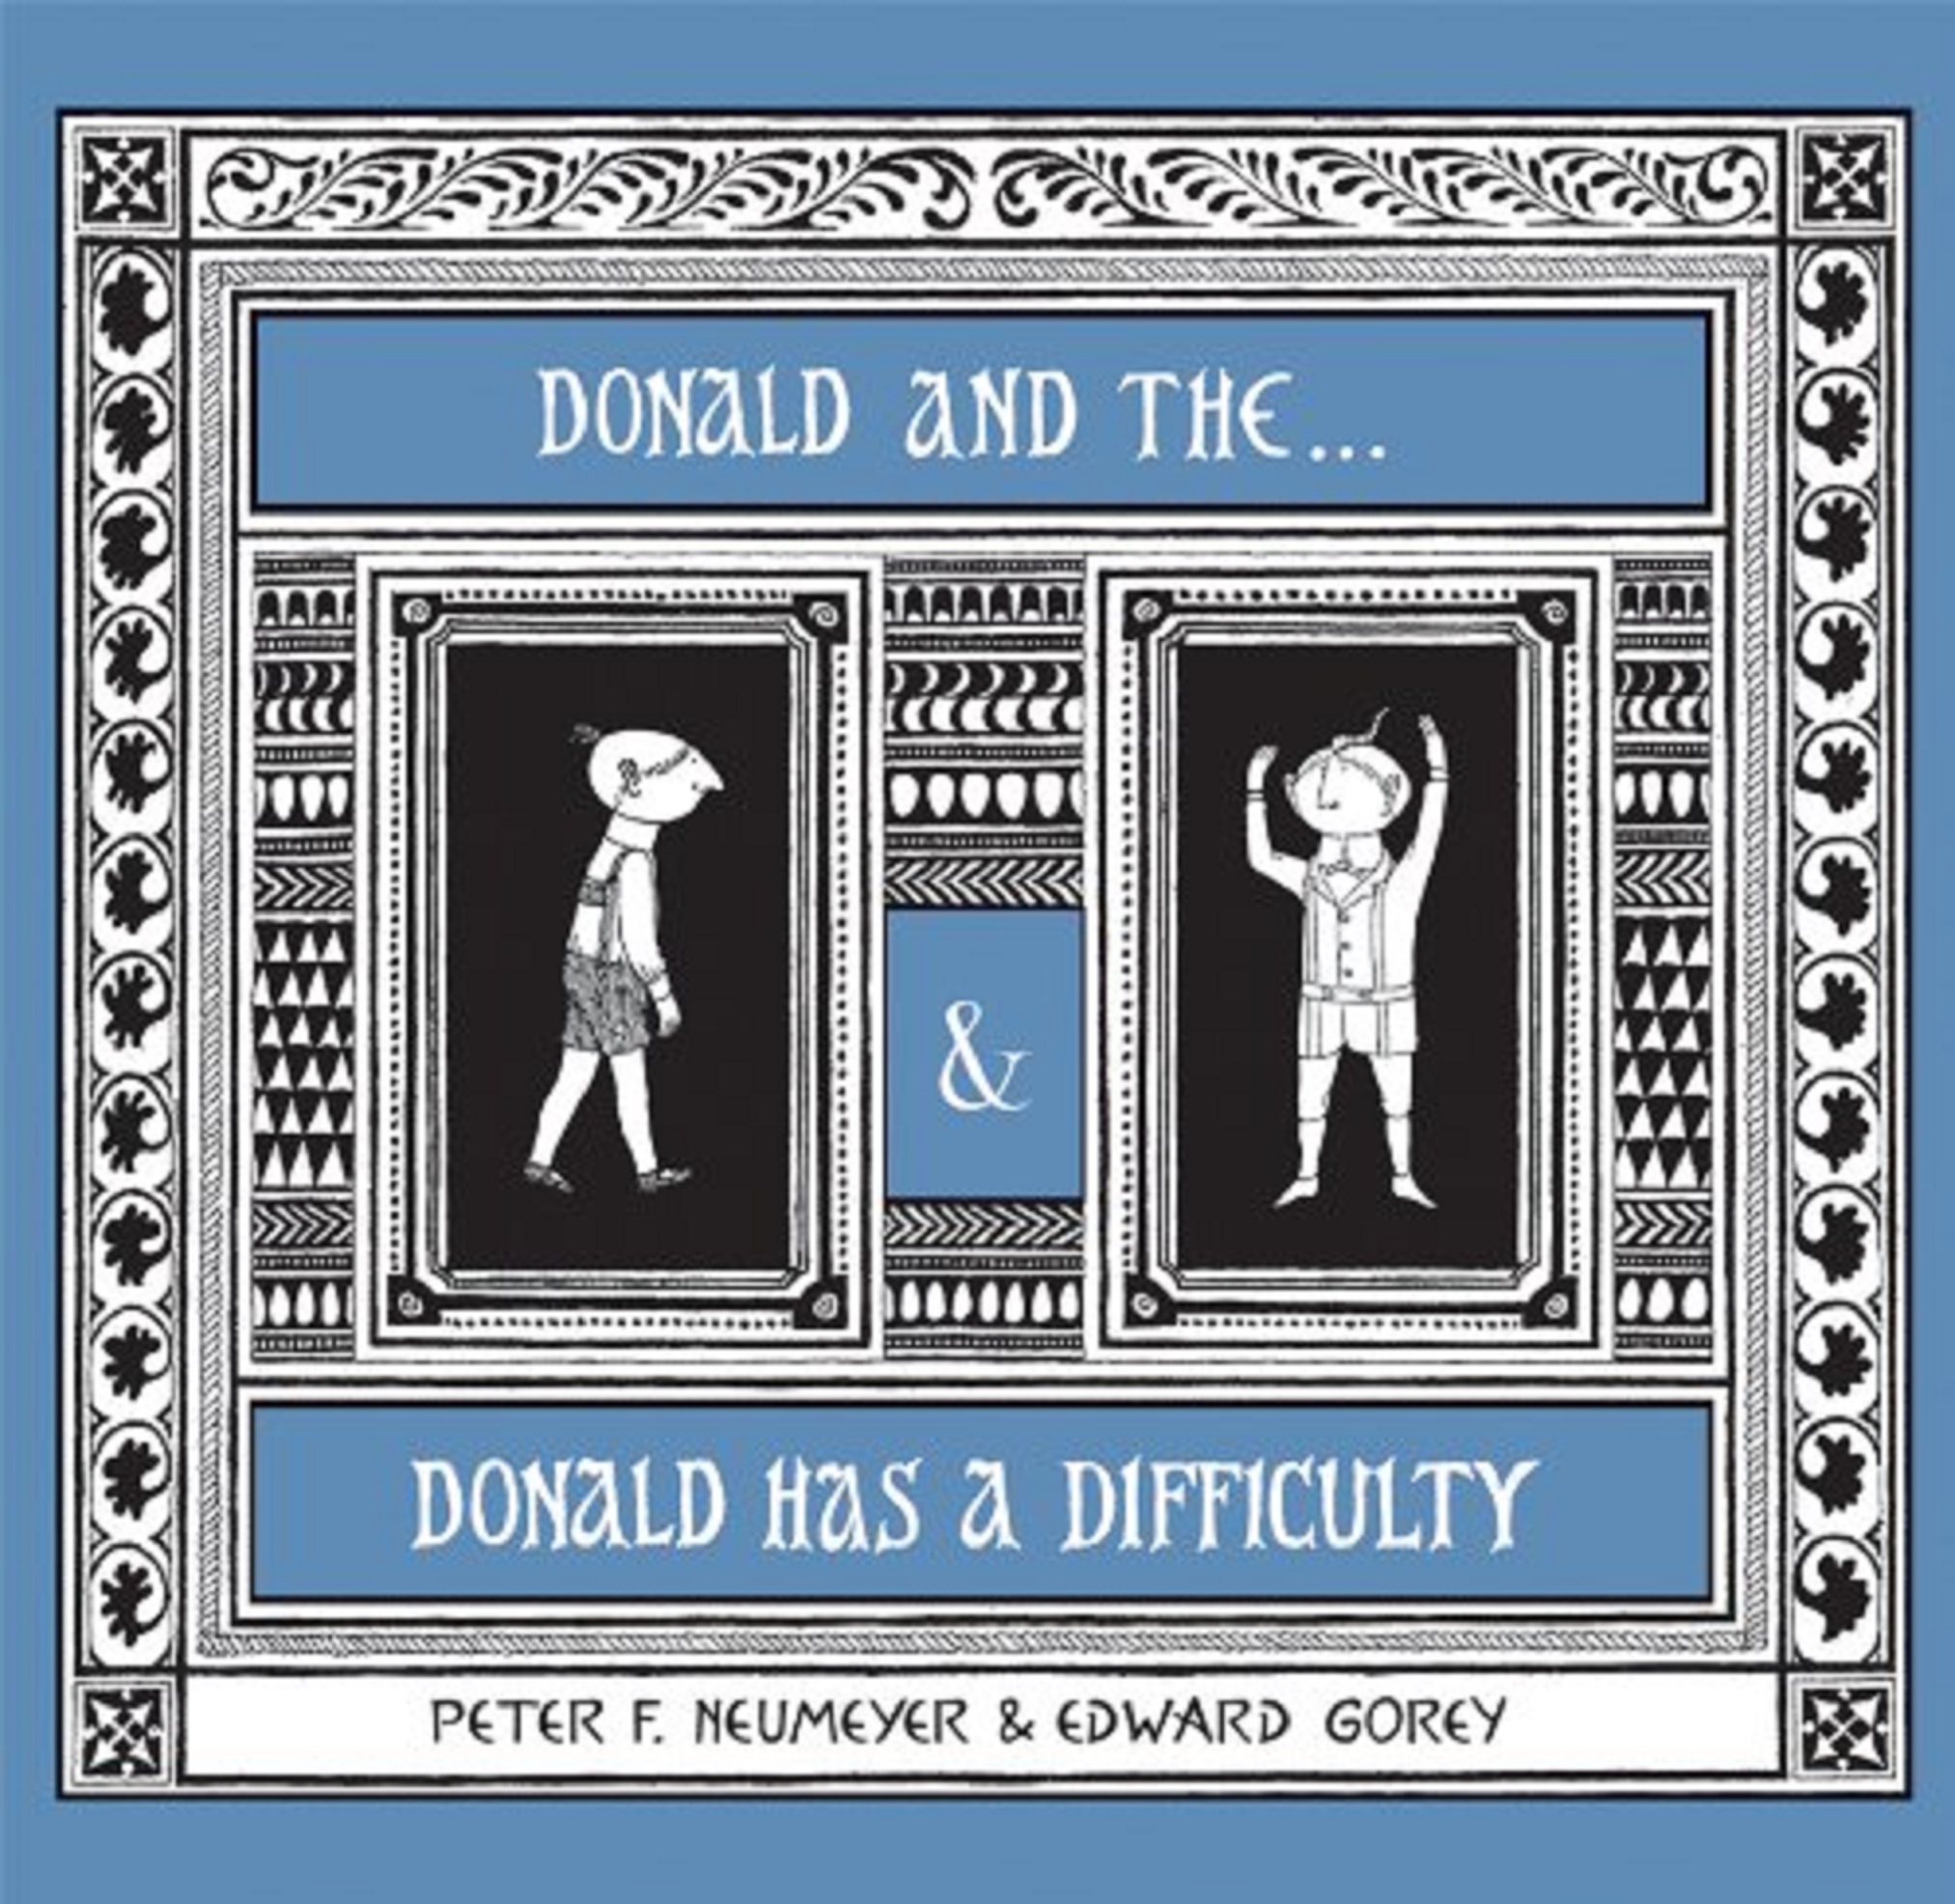 The Donald Boxed Set Donald and the... & Donald Has a Difficulty A205 | Peter Neumeyer, Edward Gorey